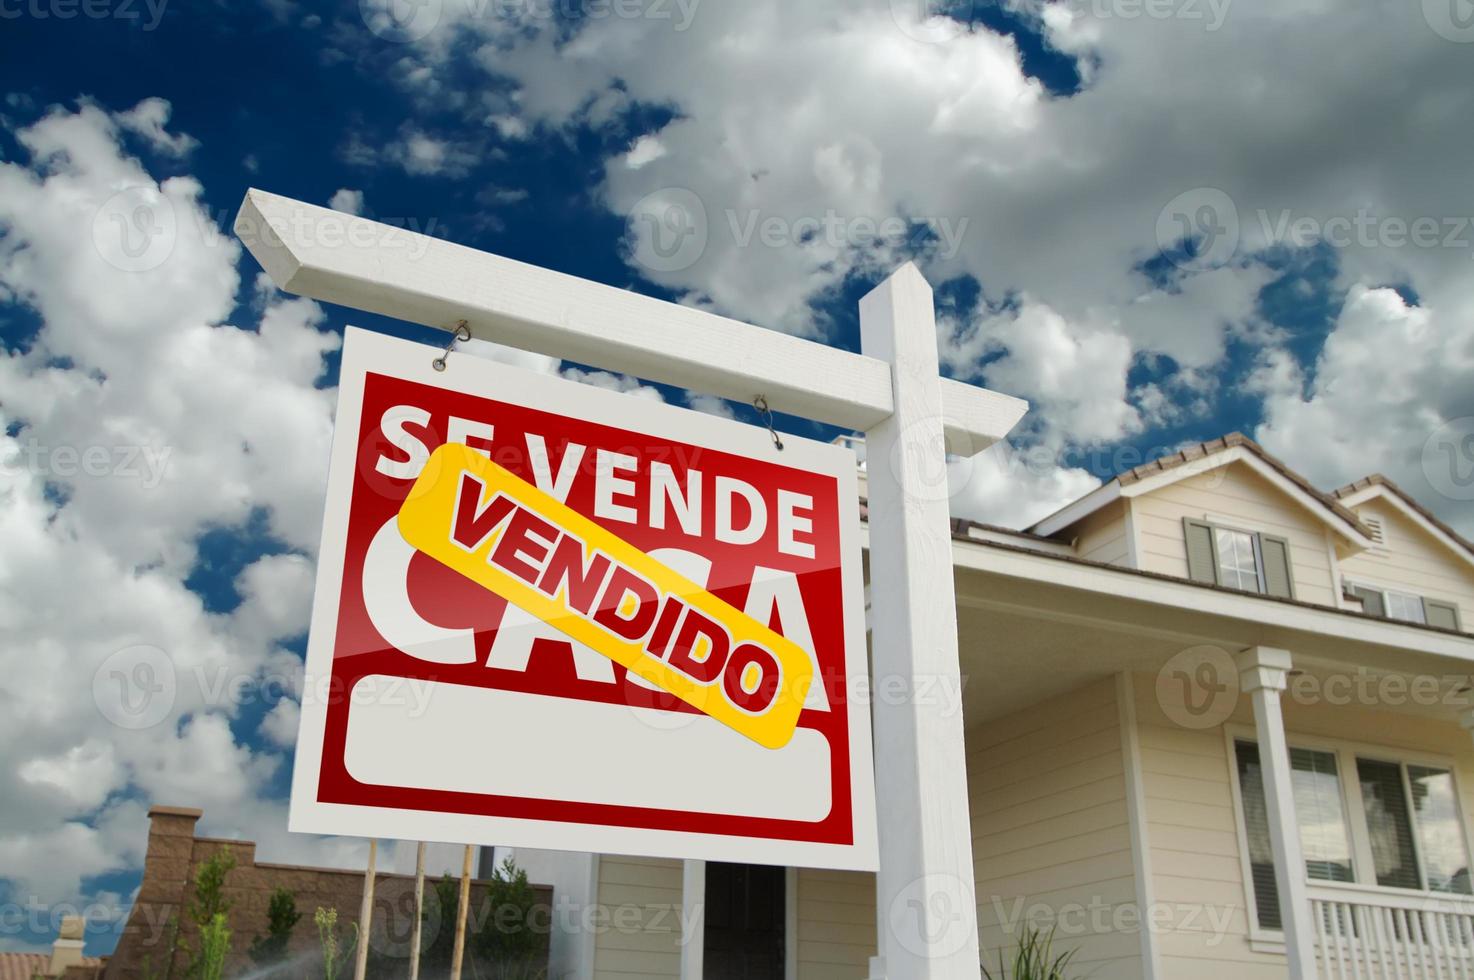 Spanish Sold Home for Real Estate Sale Sign photo